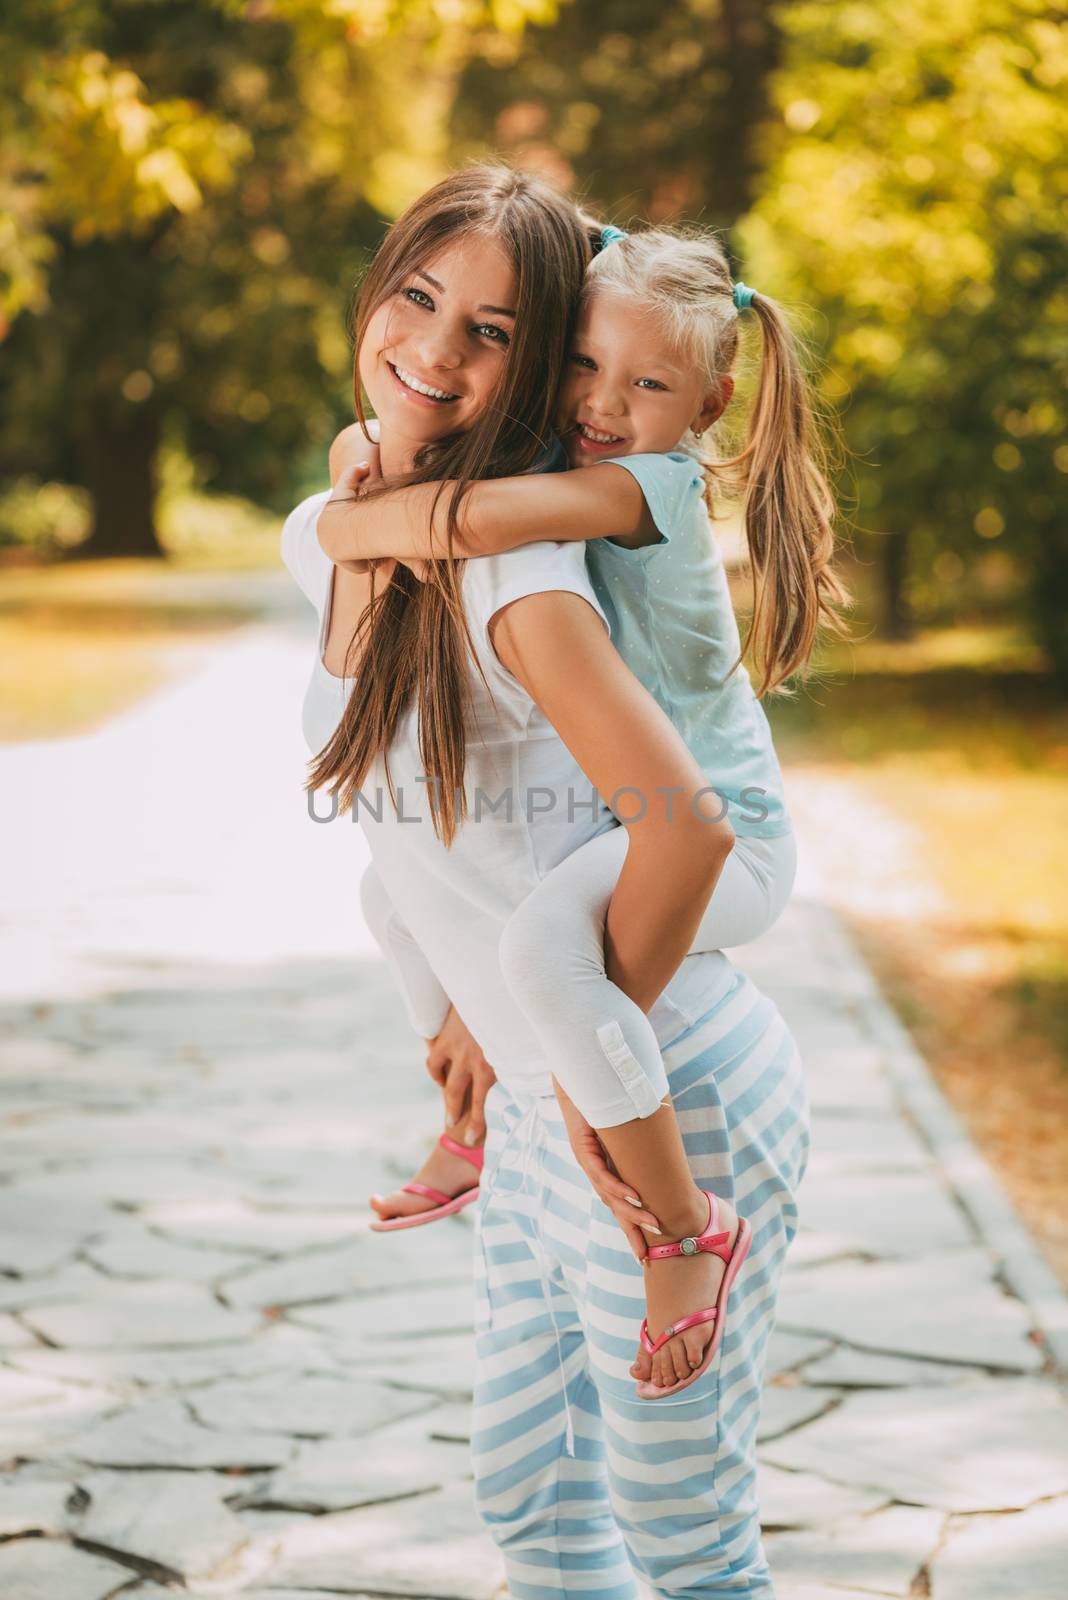 Cute Little Girl And Her Mom by MilanMarkovic78